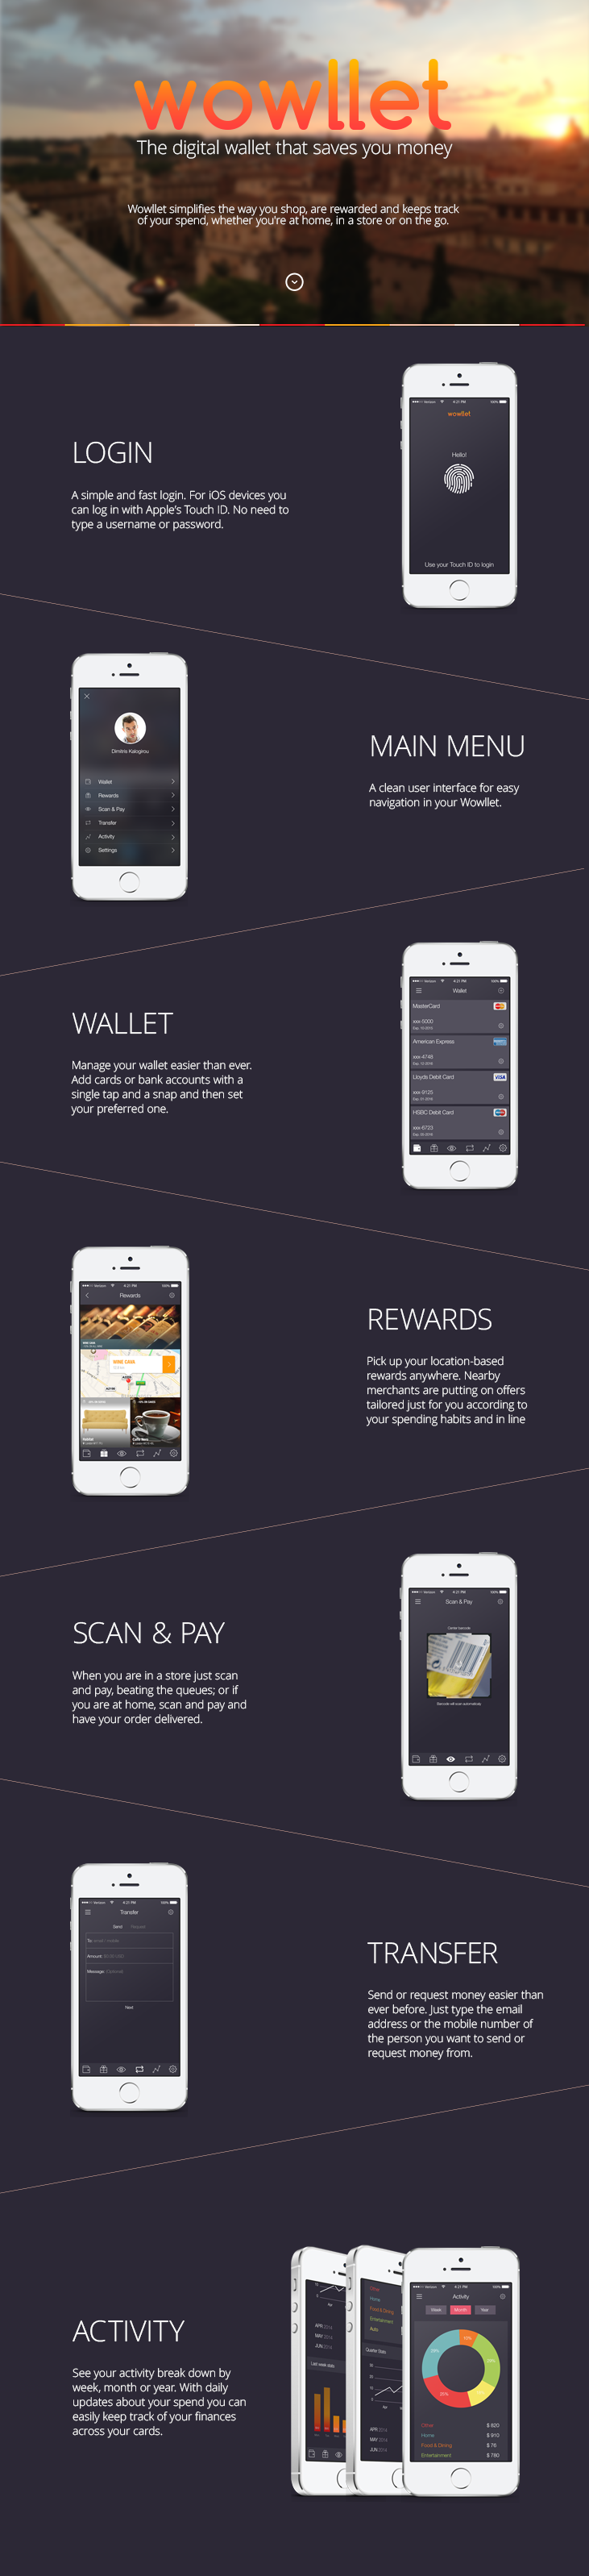 iphone app WALLET mobile ios icons